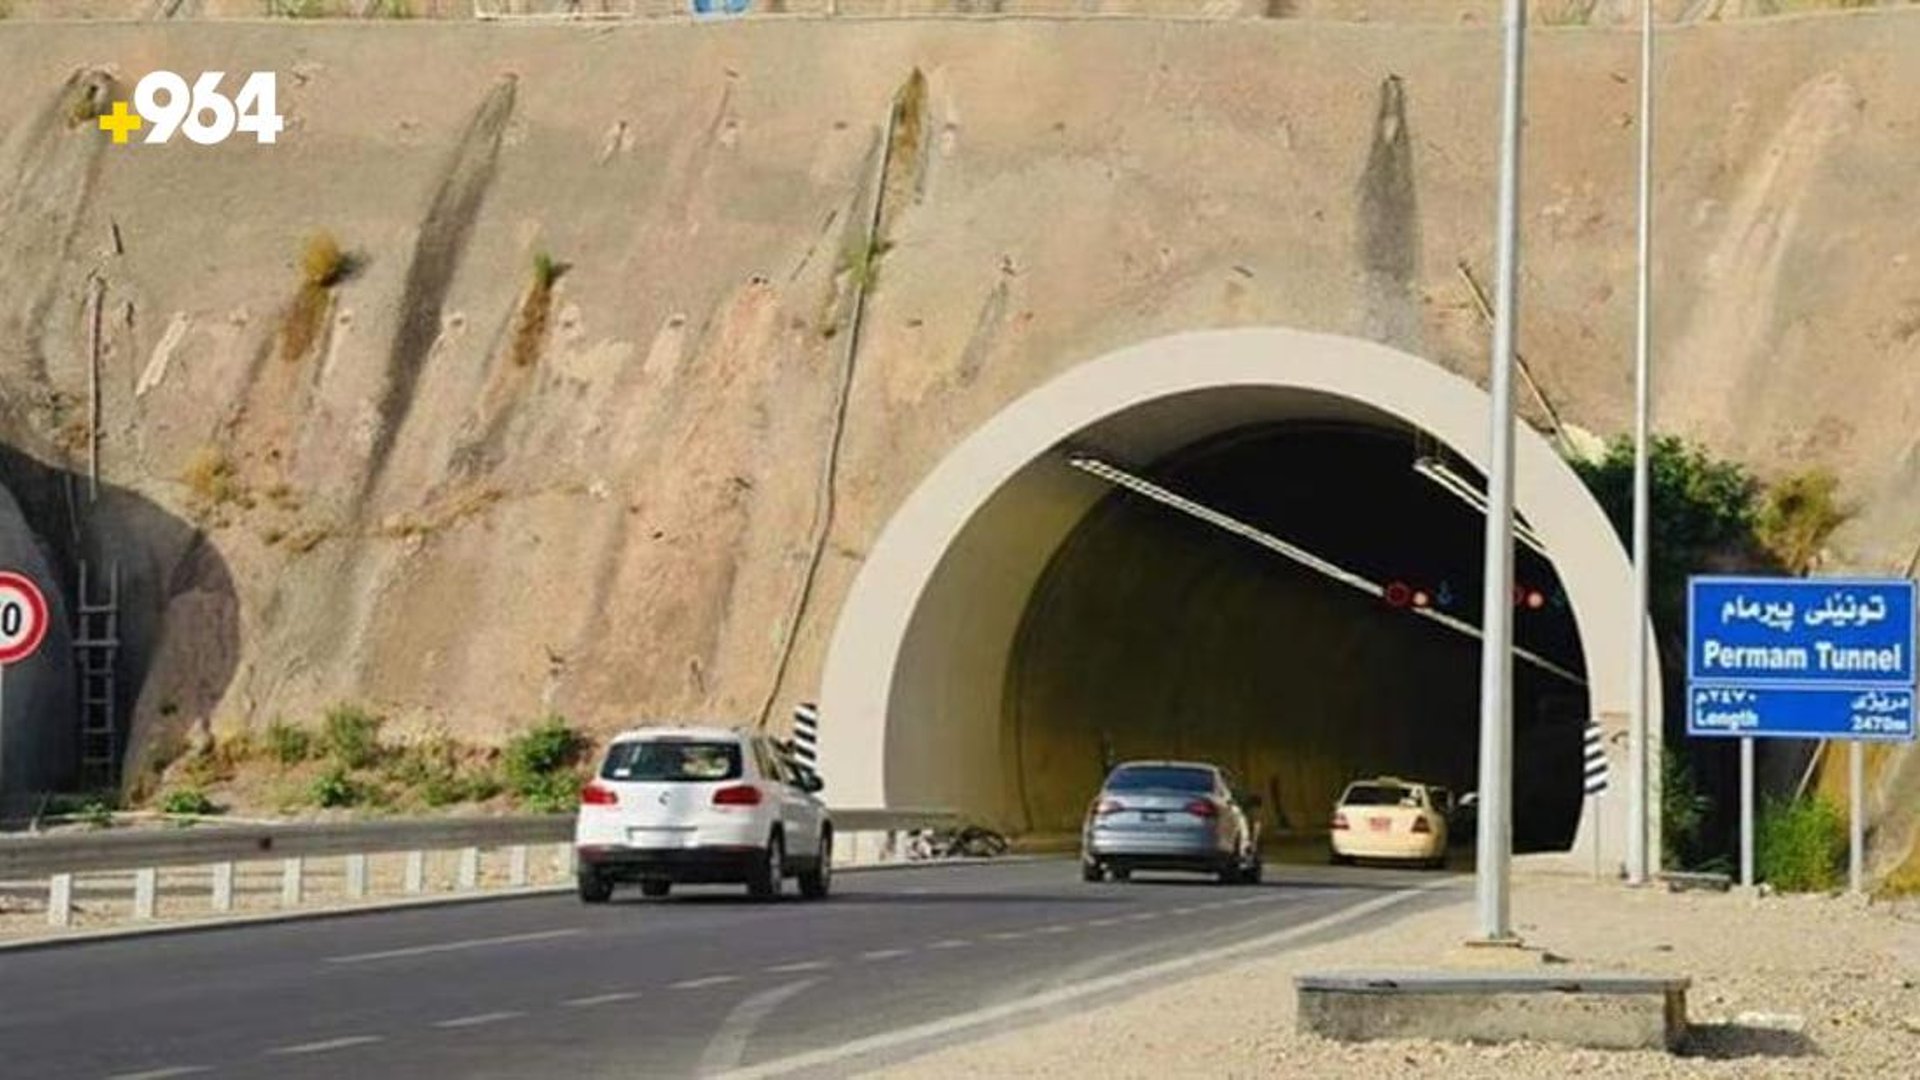 Erbil traffic directorate warns drivers of tunnel closure and provides alternative routes